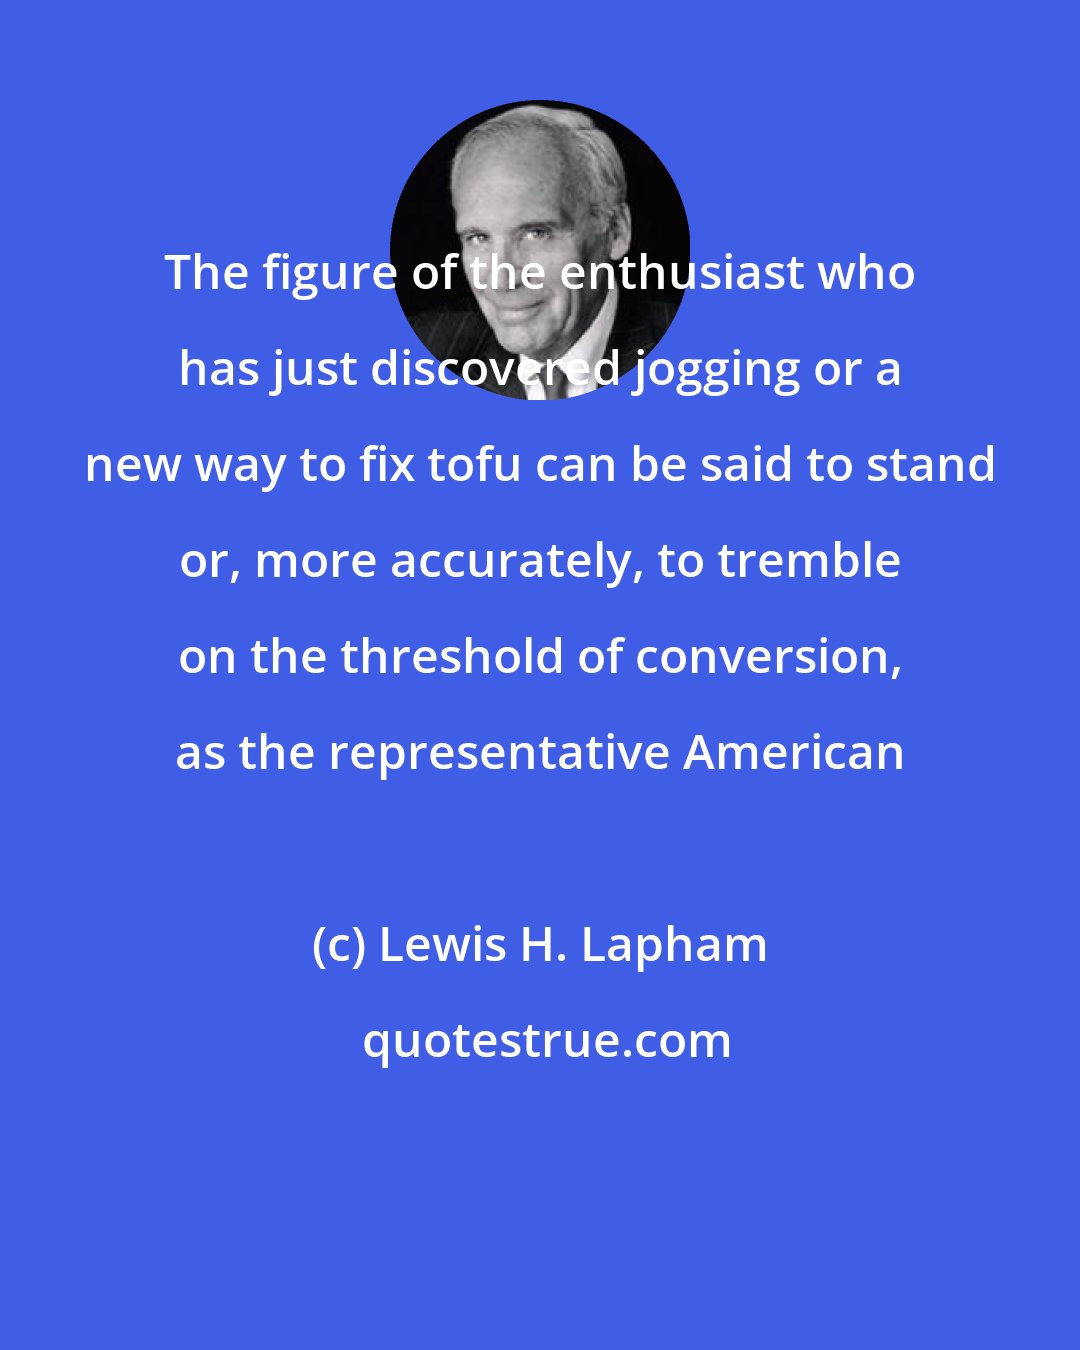 Lewis H. Lapham: The figure of the enthusiast who has just discovered jogging or a new way to fix tofu can be said to stand or, more accurately, to tremble on the threshold of conversion, as the representative American